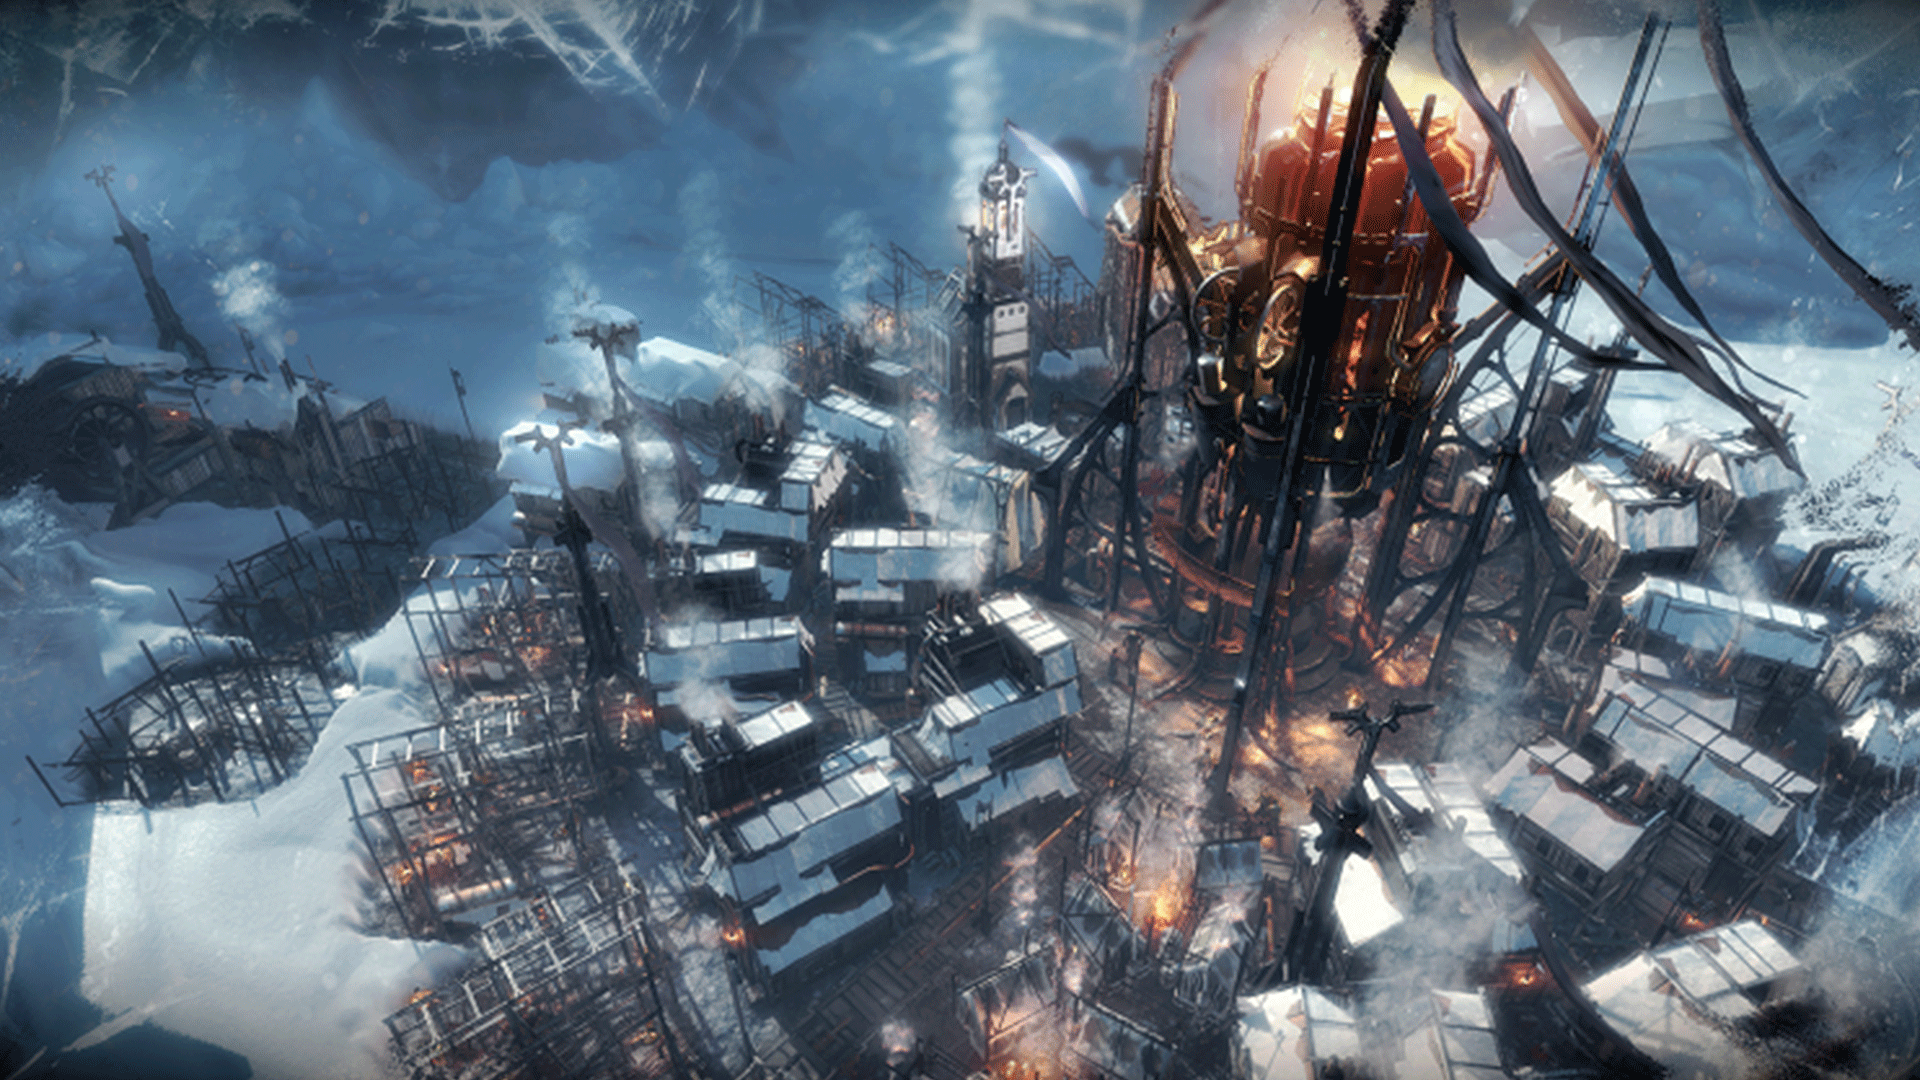 frostpunk challenges players to build a thriving settlement in the frozen wastes